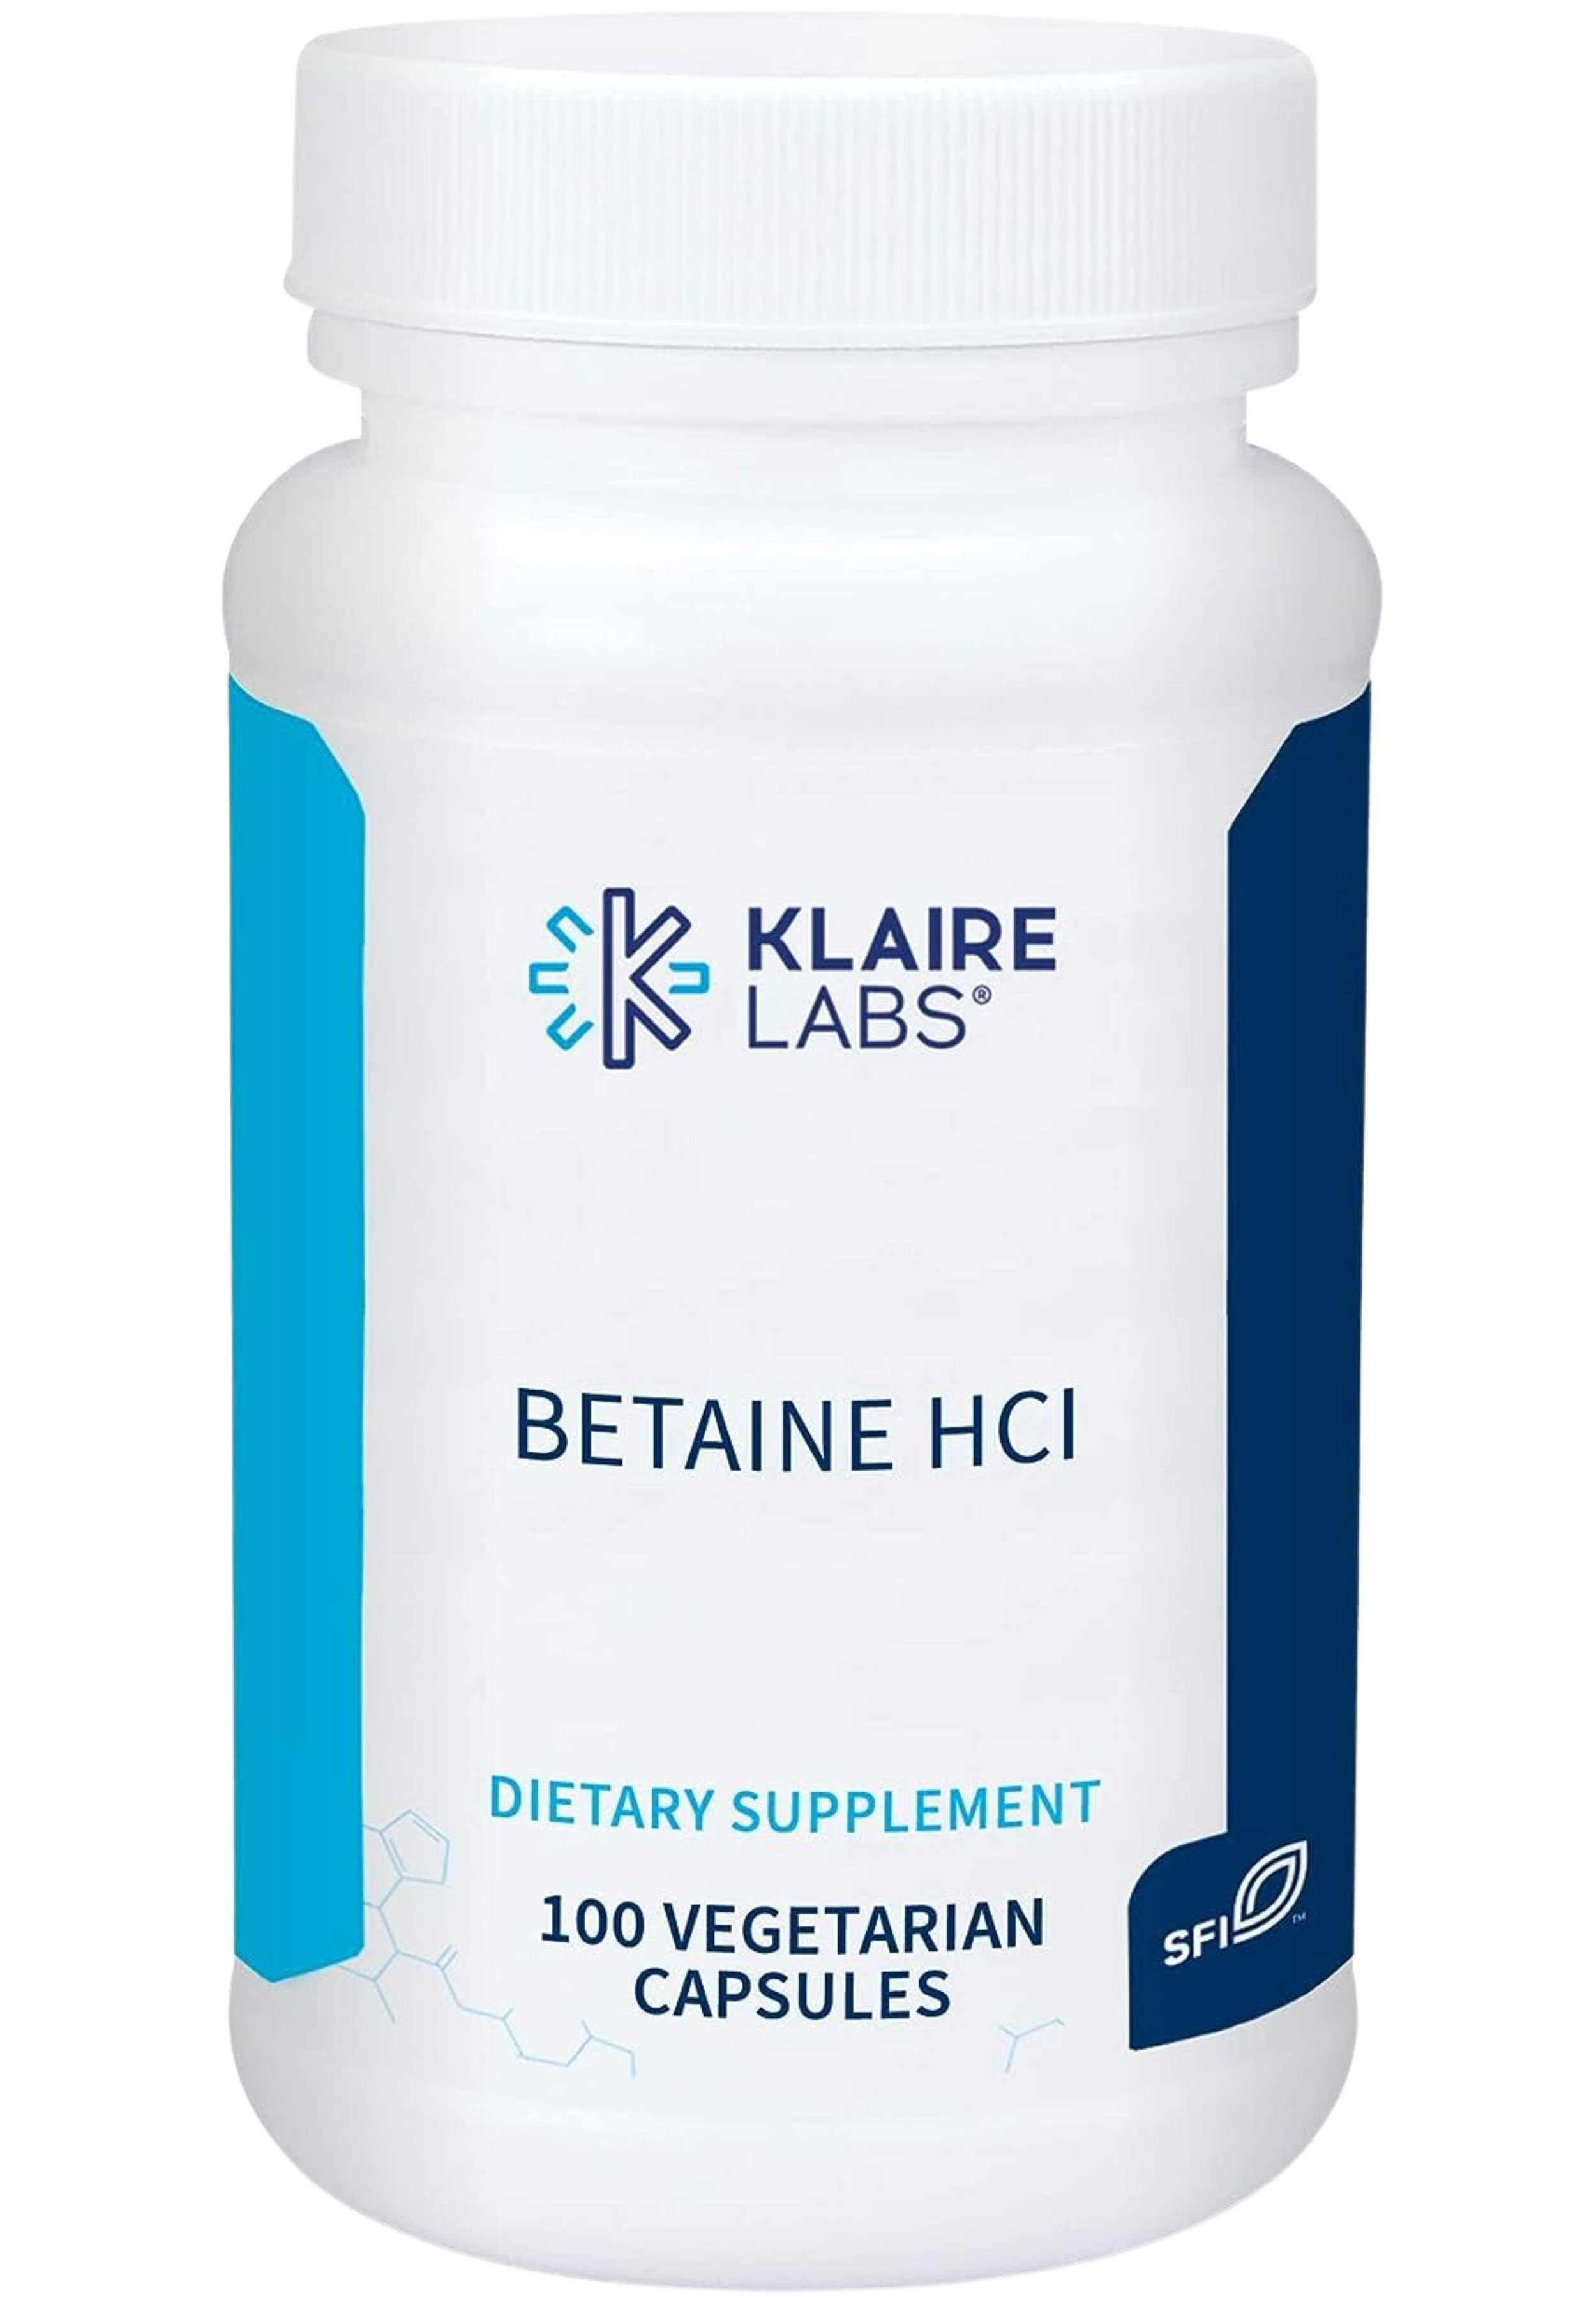 Klaire Labs Betaine HCl